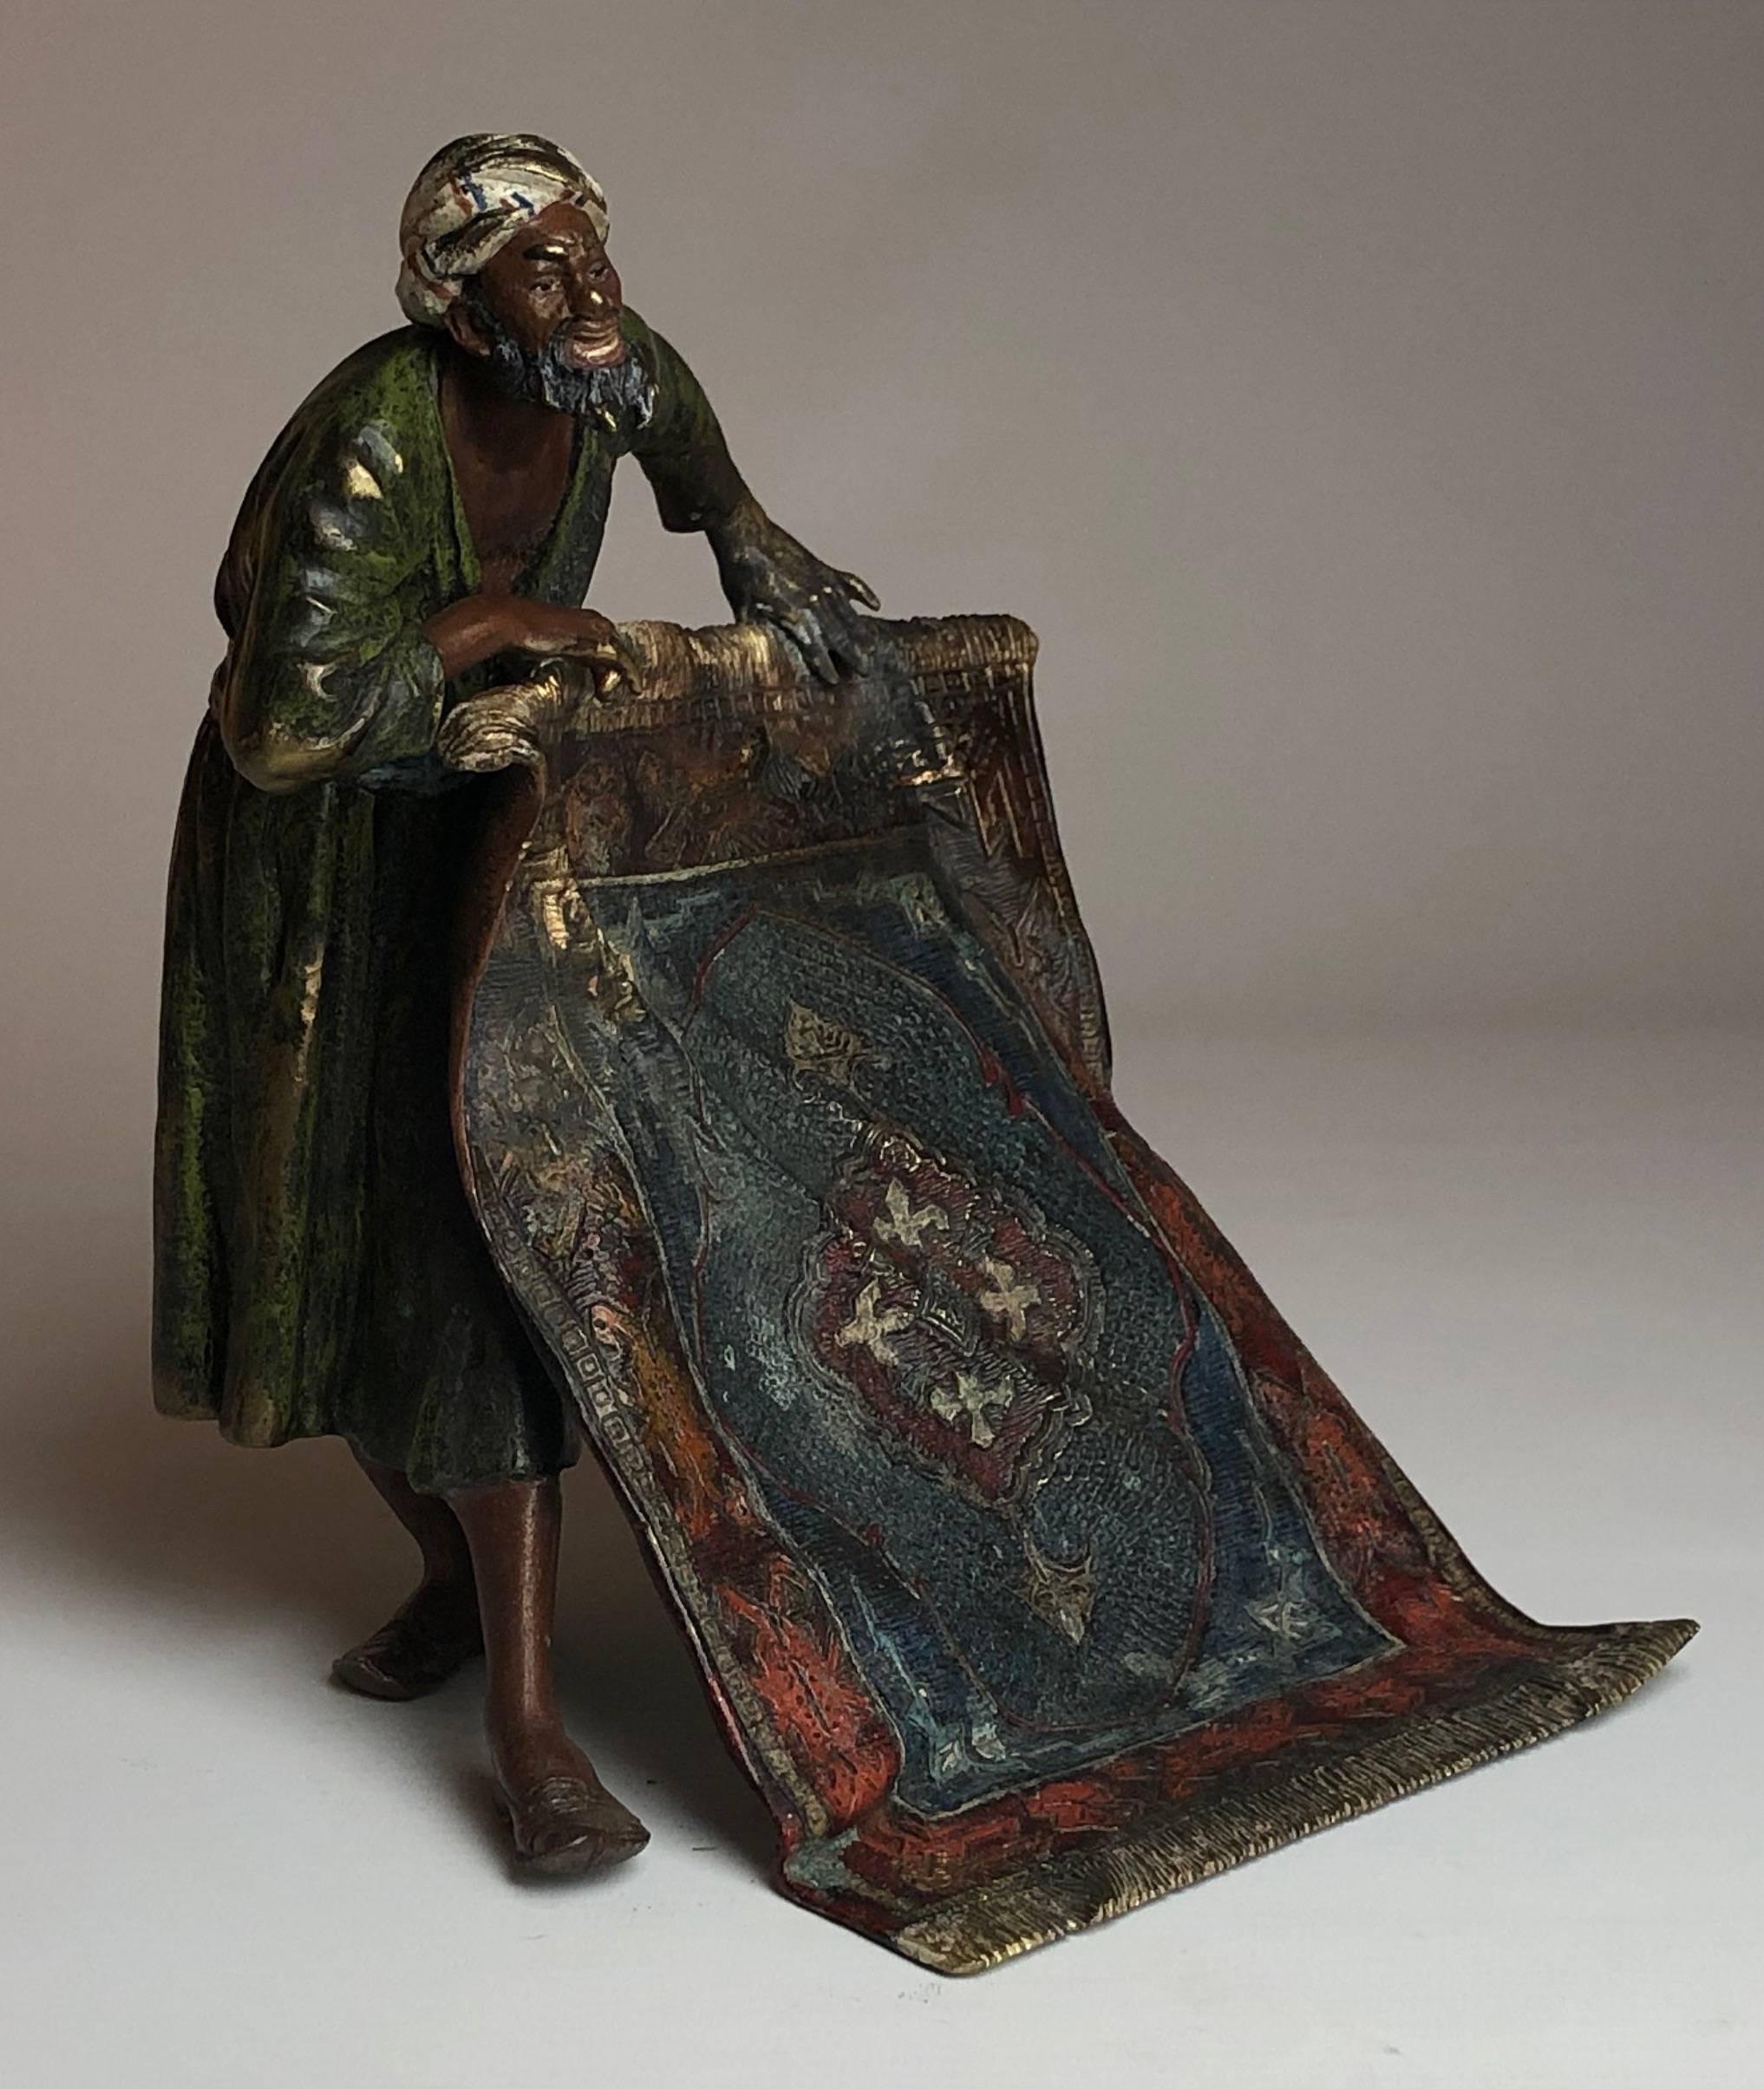 A very fine early 20th century cold painted Austrian bronze study of an Arab man selling carpets with excellent color and stunning hand finished detail.

Measure: He stands 8